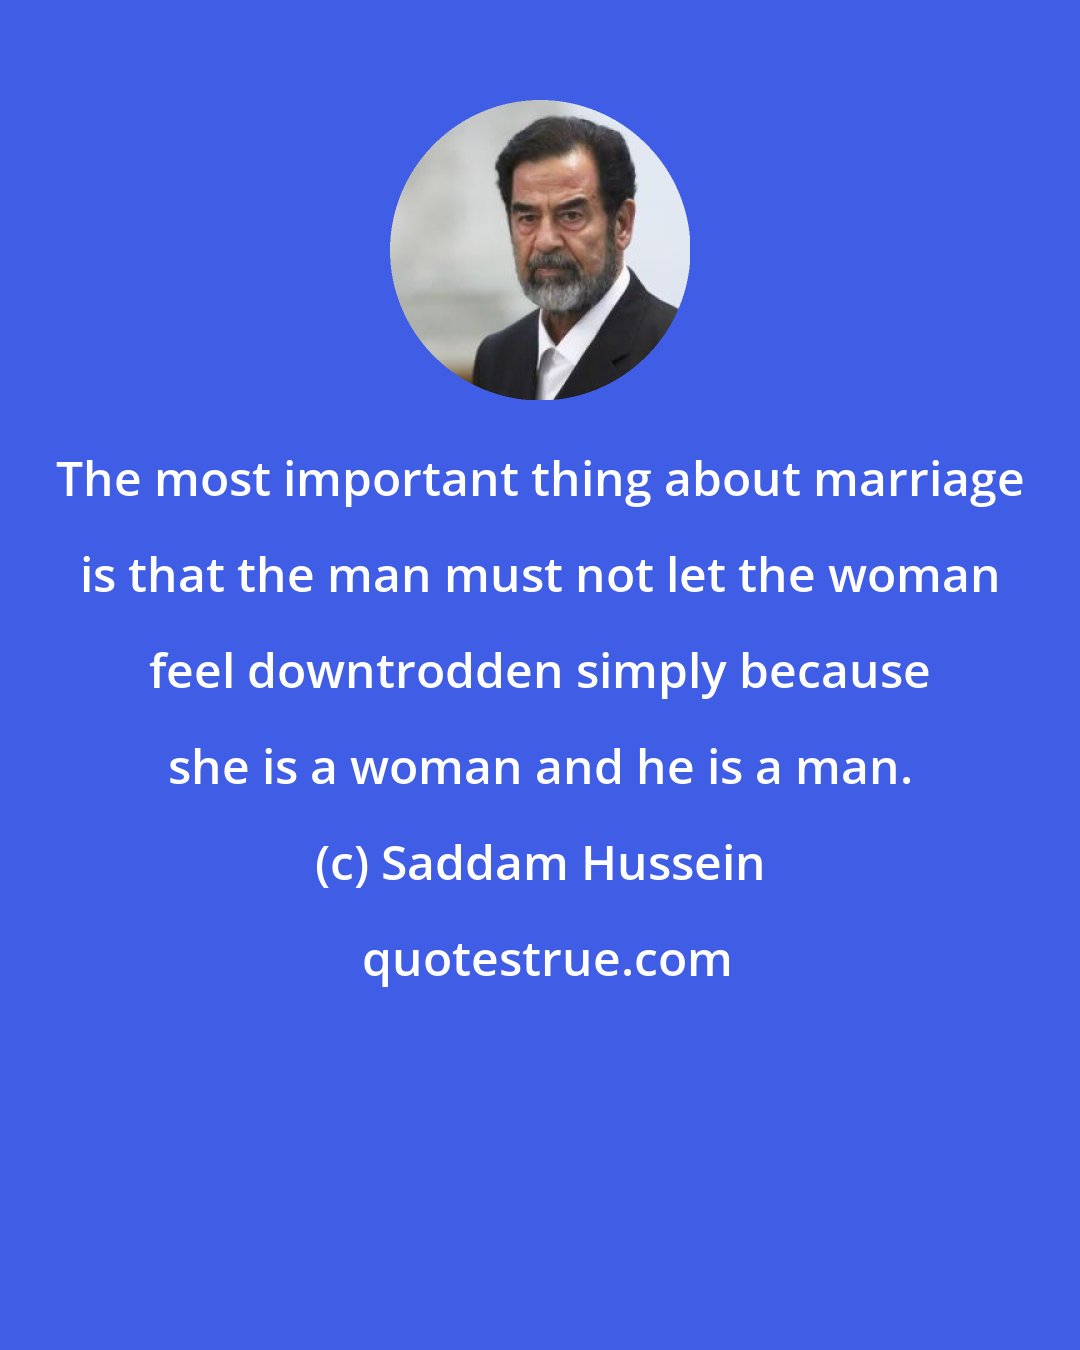 Saddam Hussein: The most important thing about marriage is that the man must not let the woman feel downtrodden simply because she is a woman and he is a man.